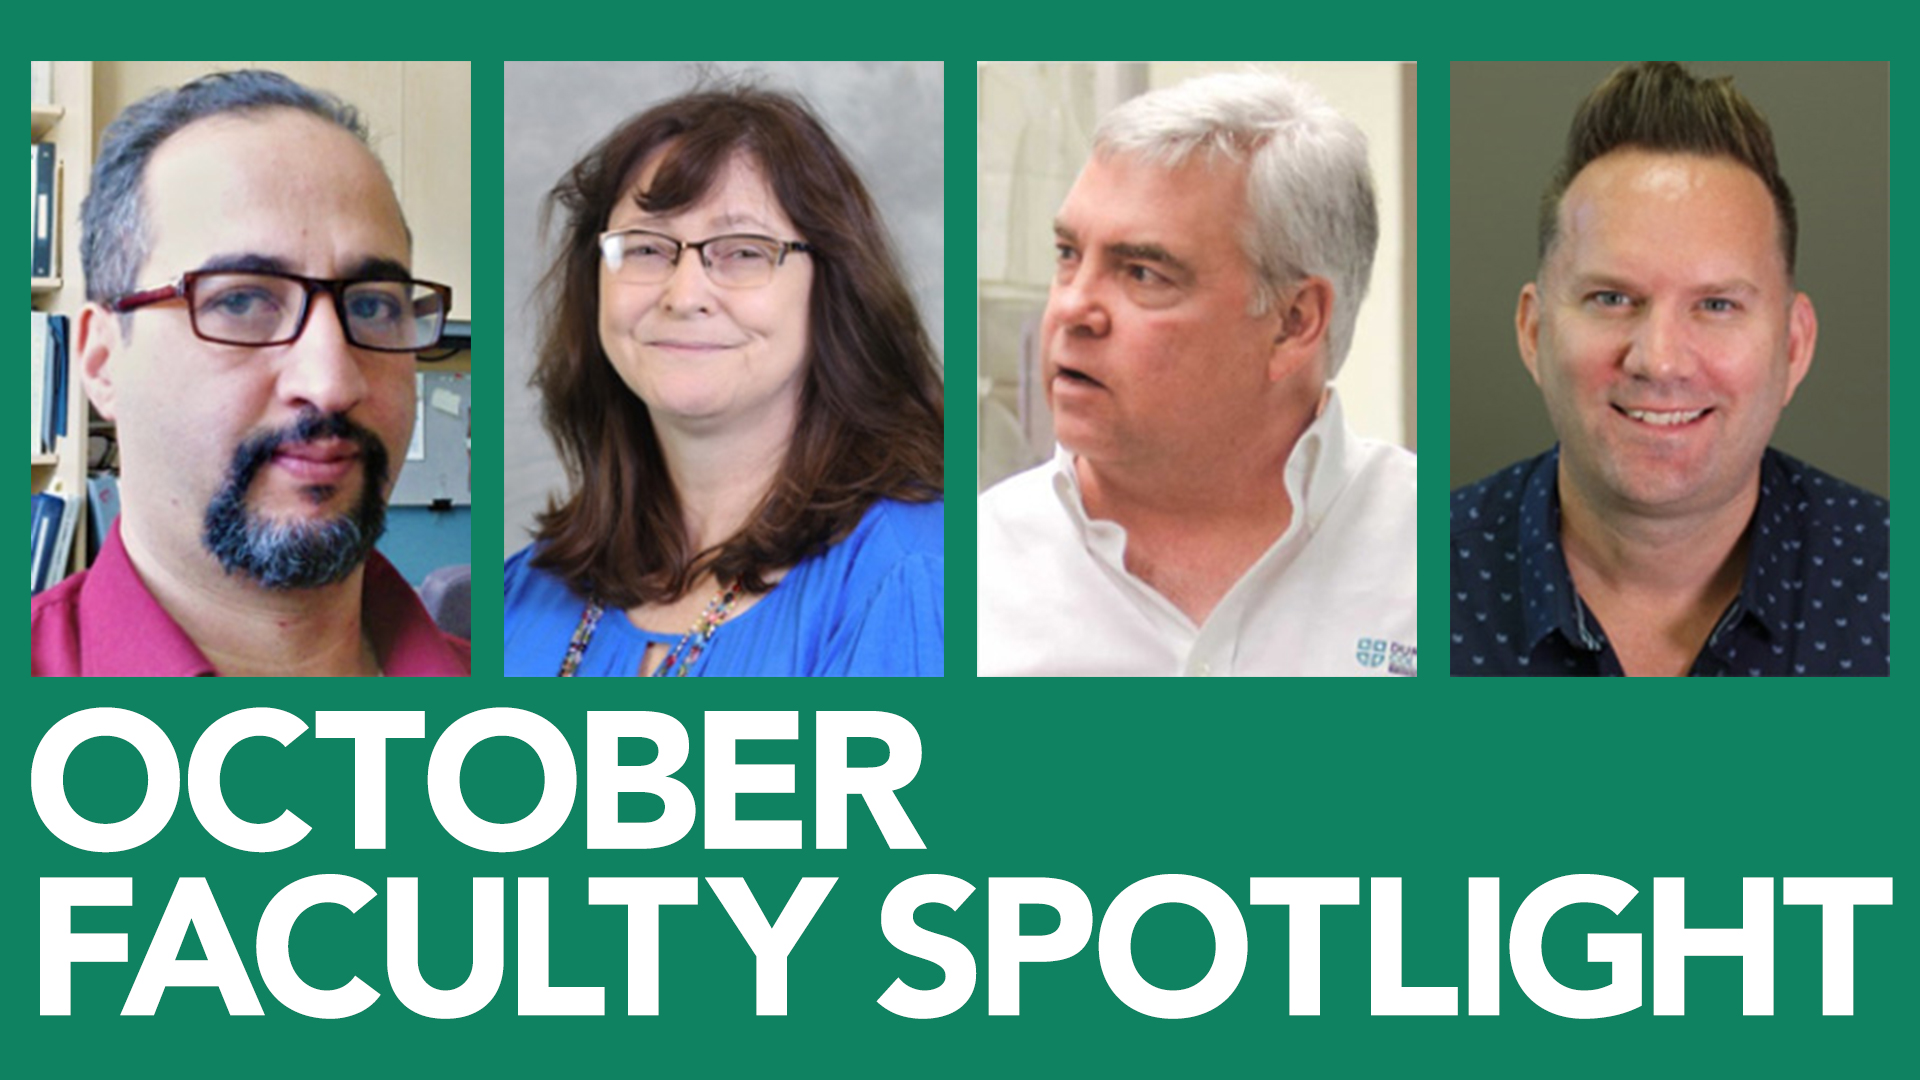 Shows profile picture of faculty members featured on the blog post